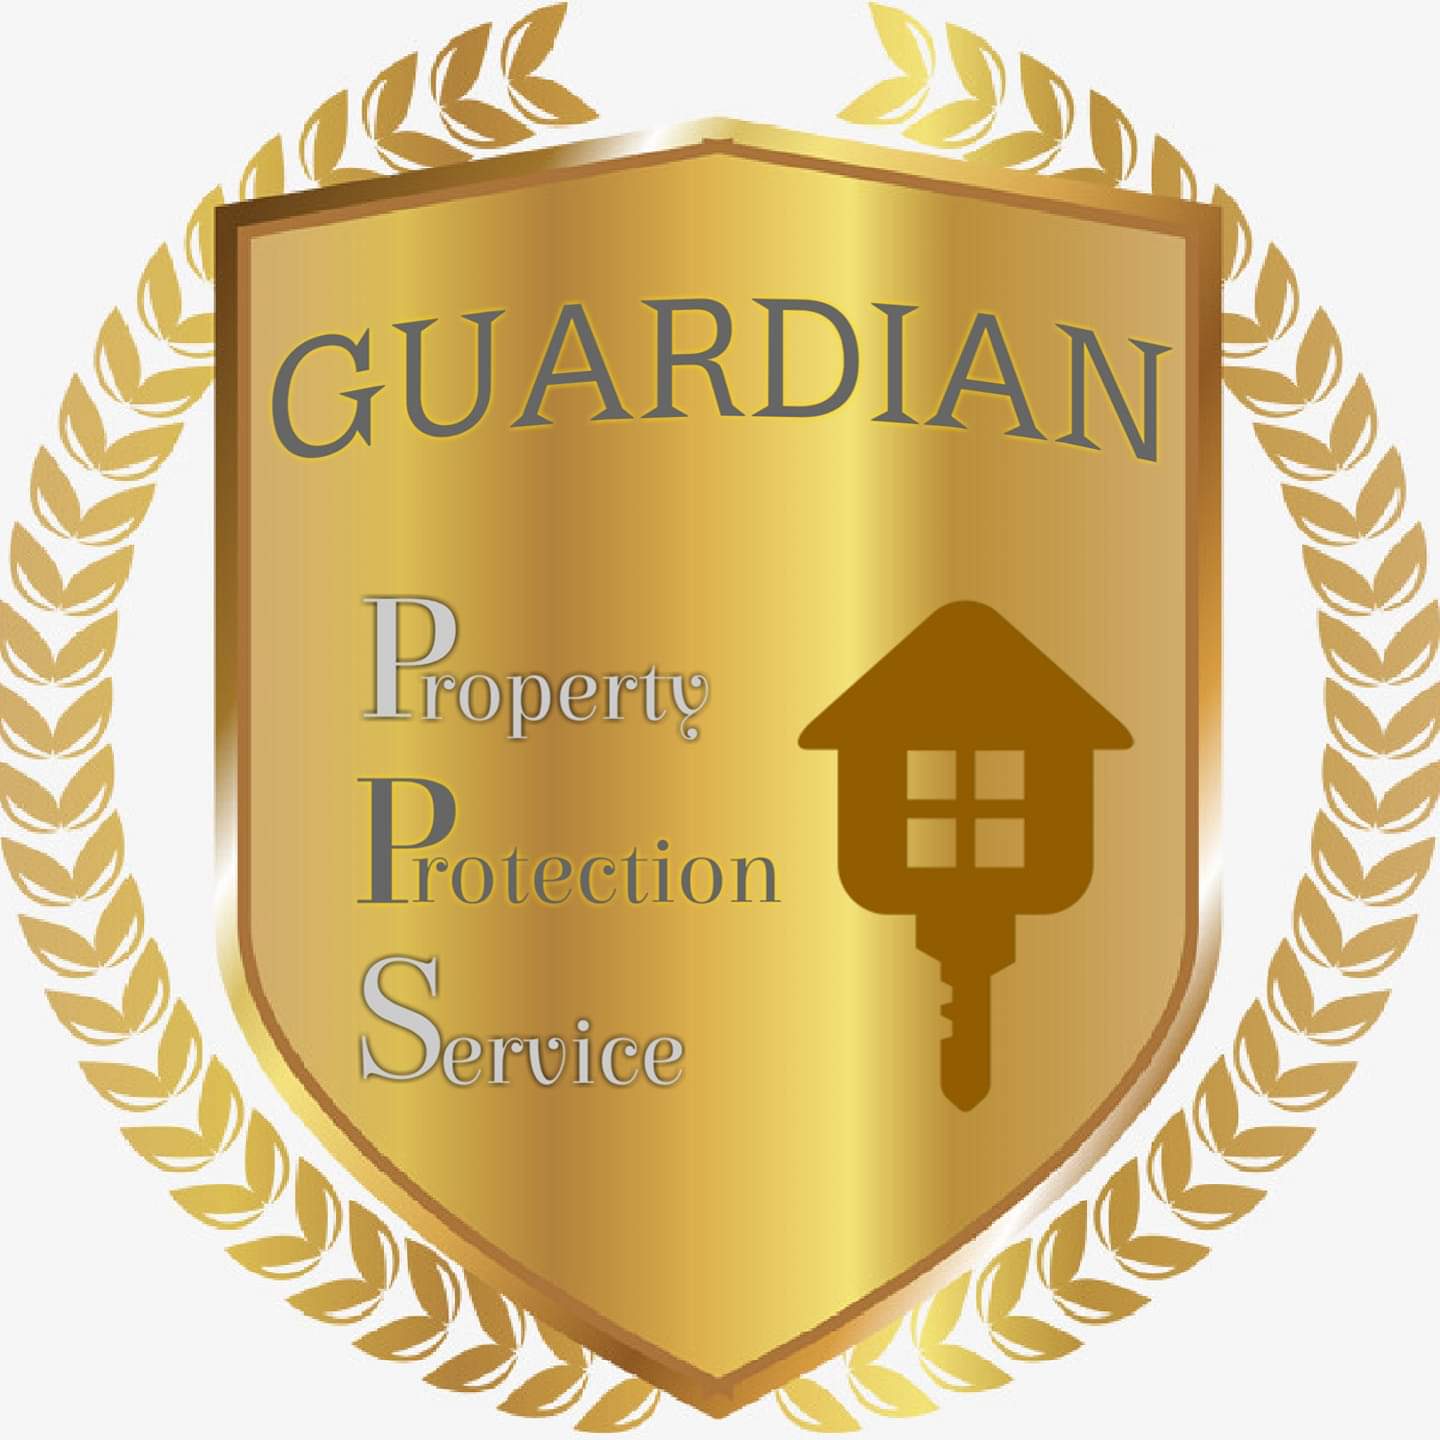 Guardian Property Protection Service